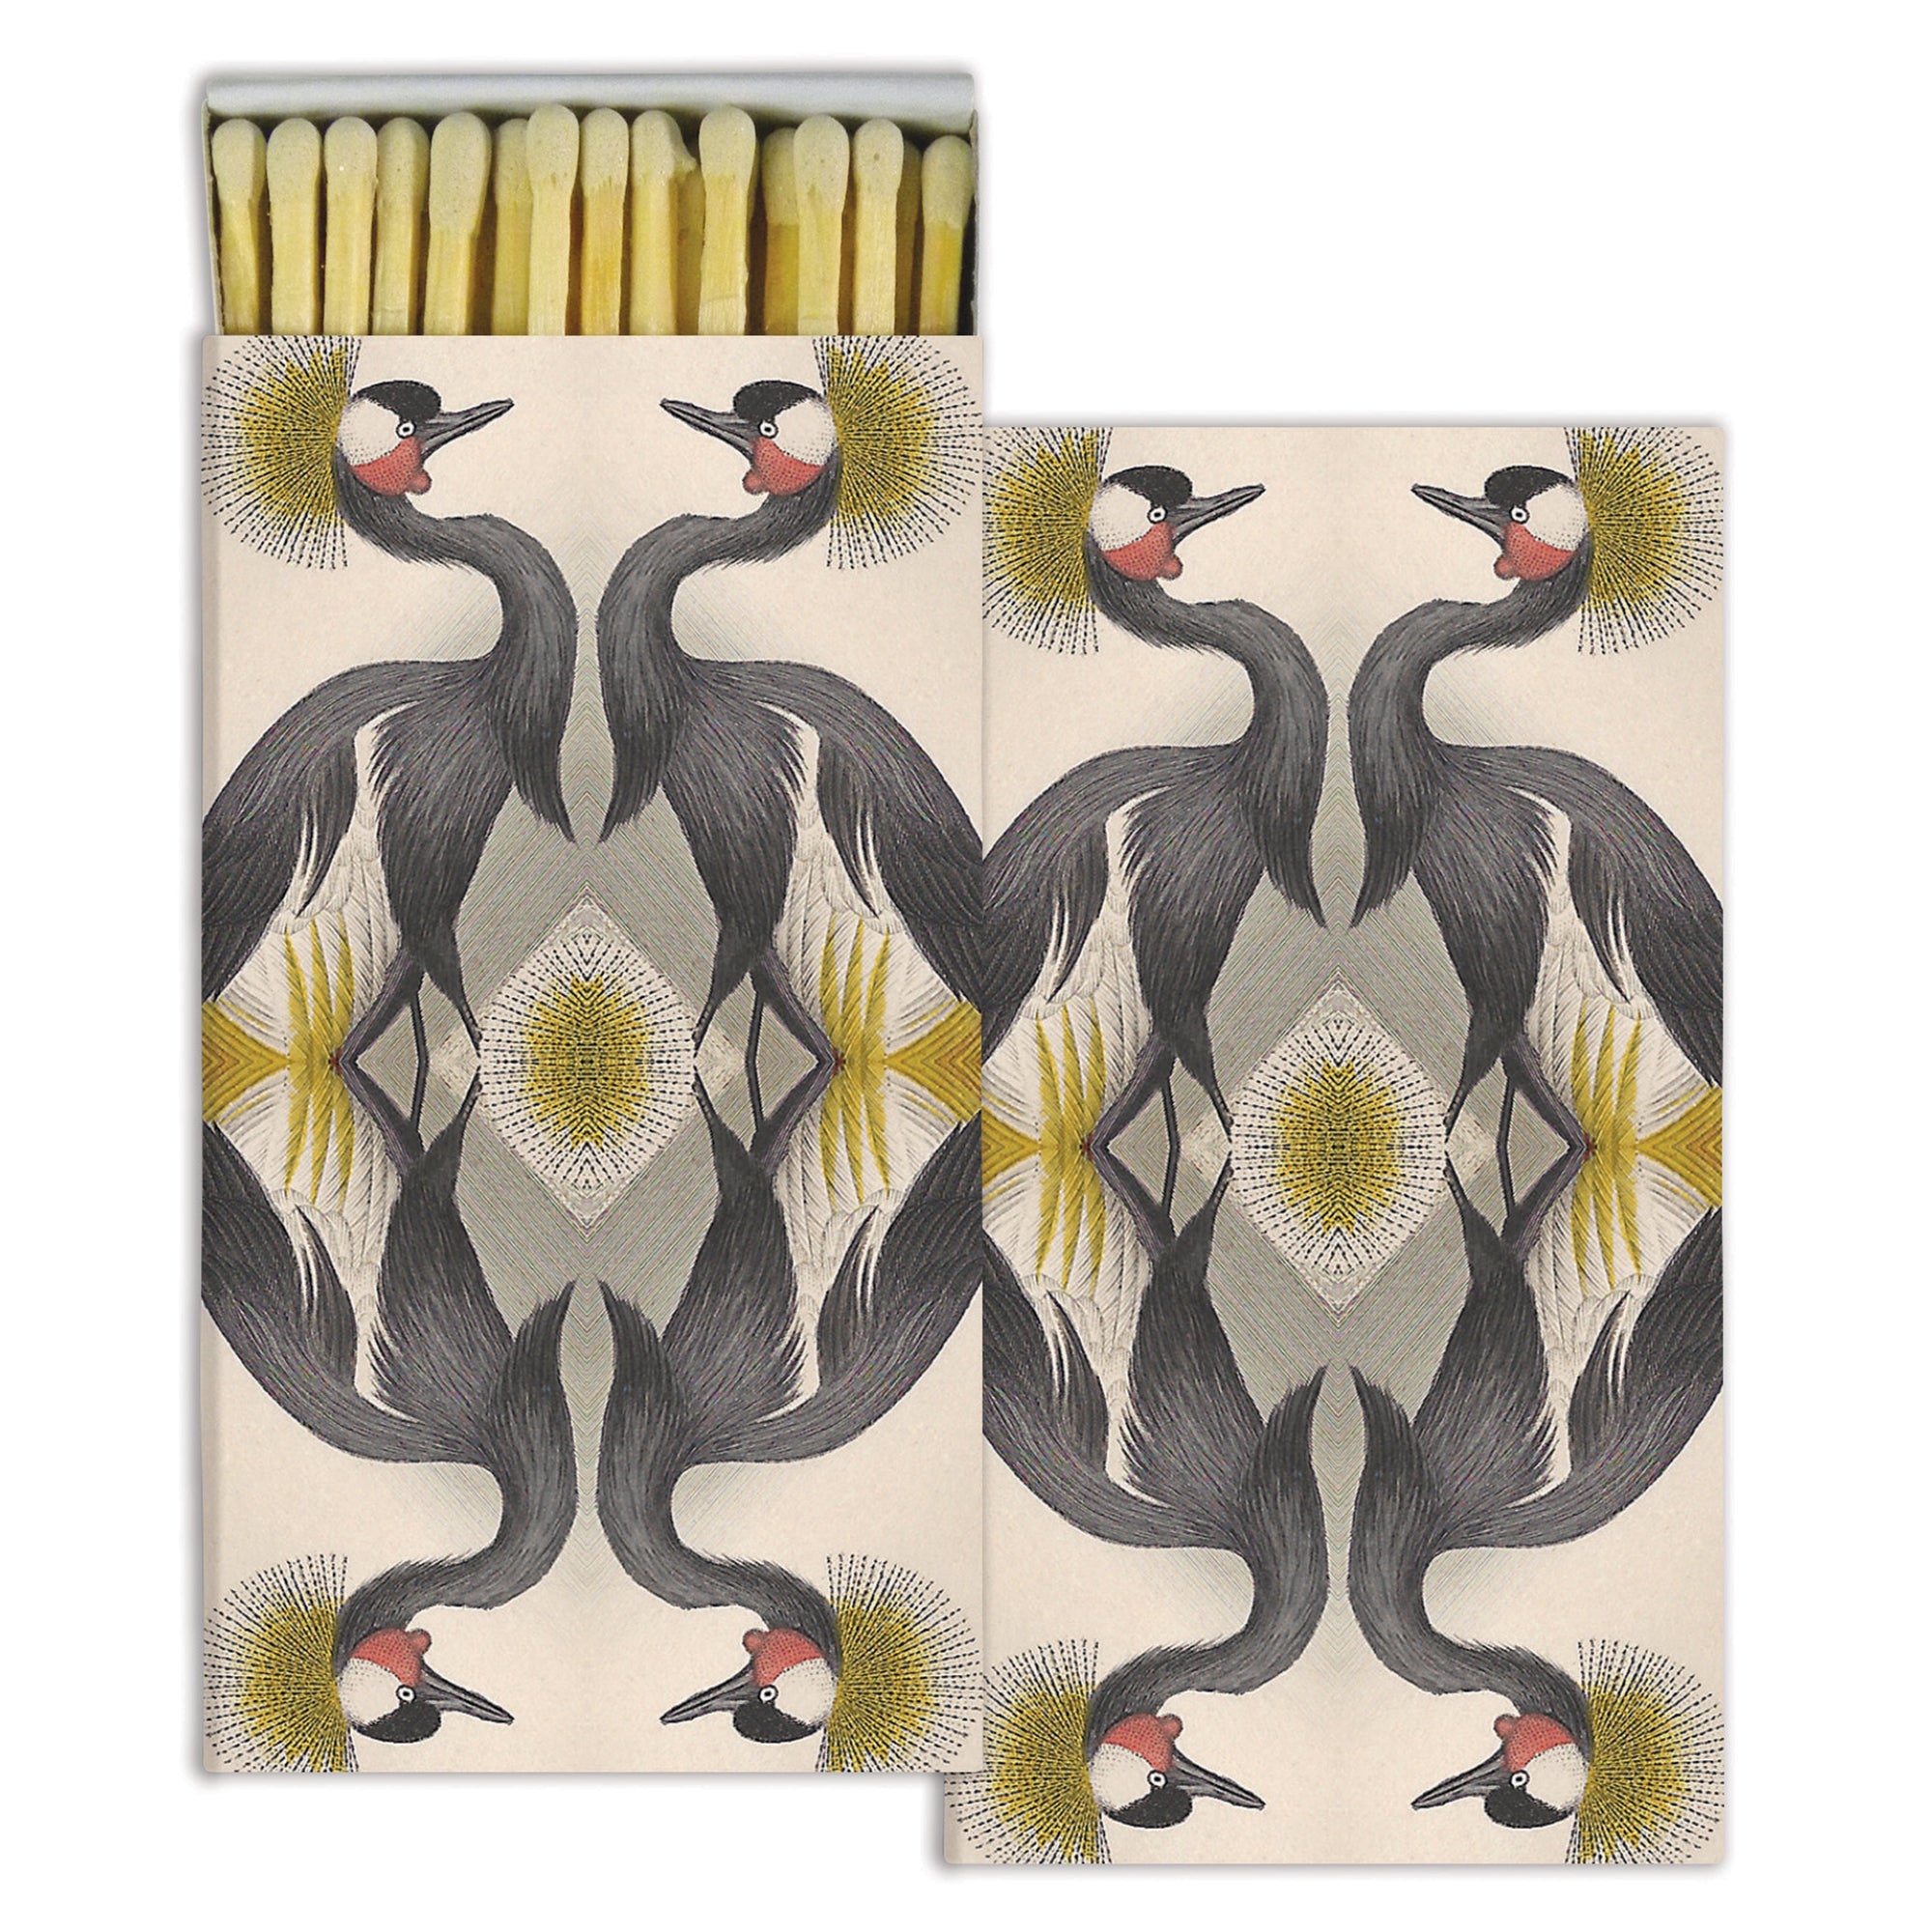 Matches - Crested Cranes